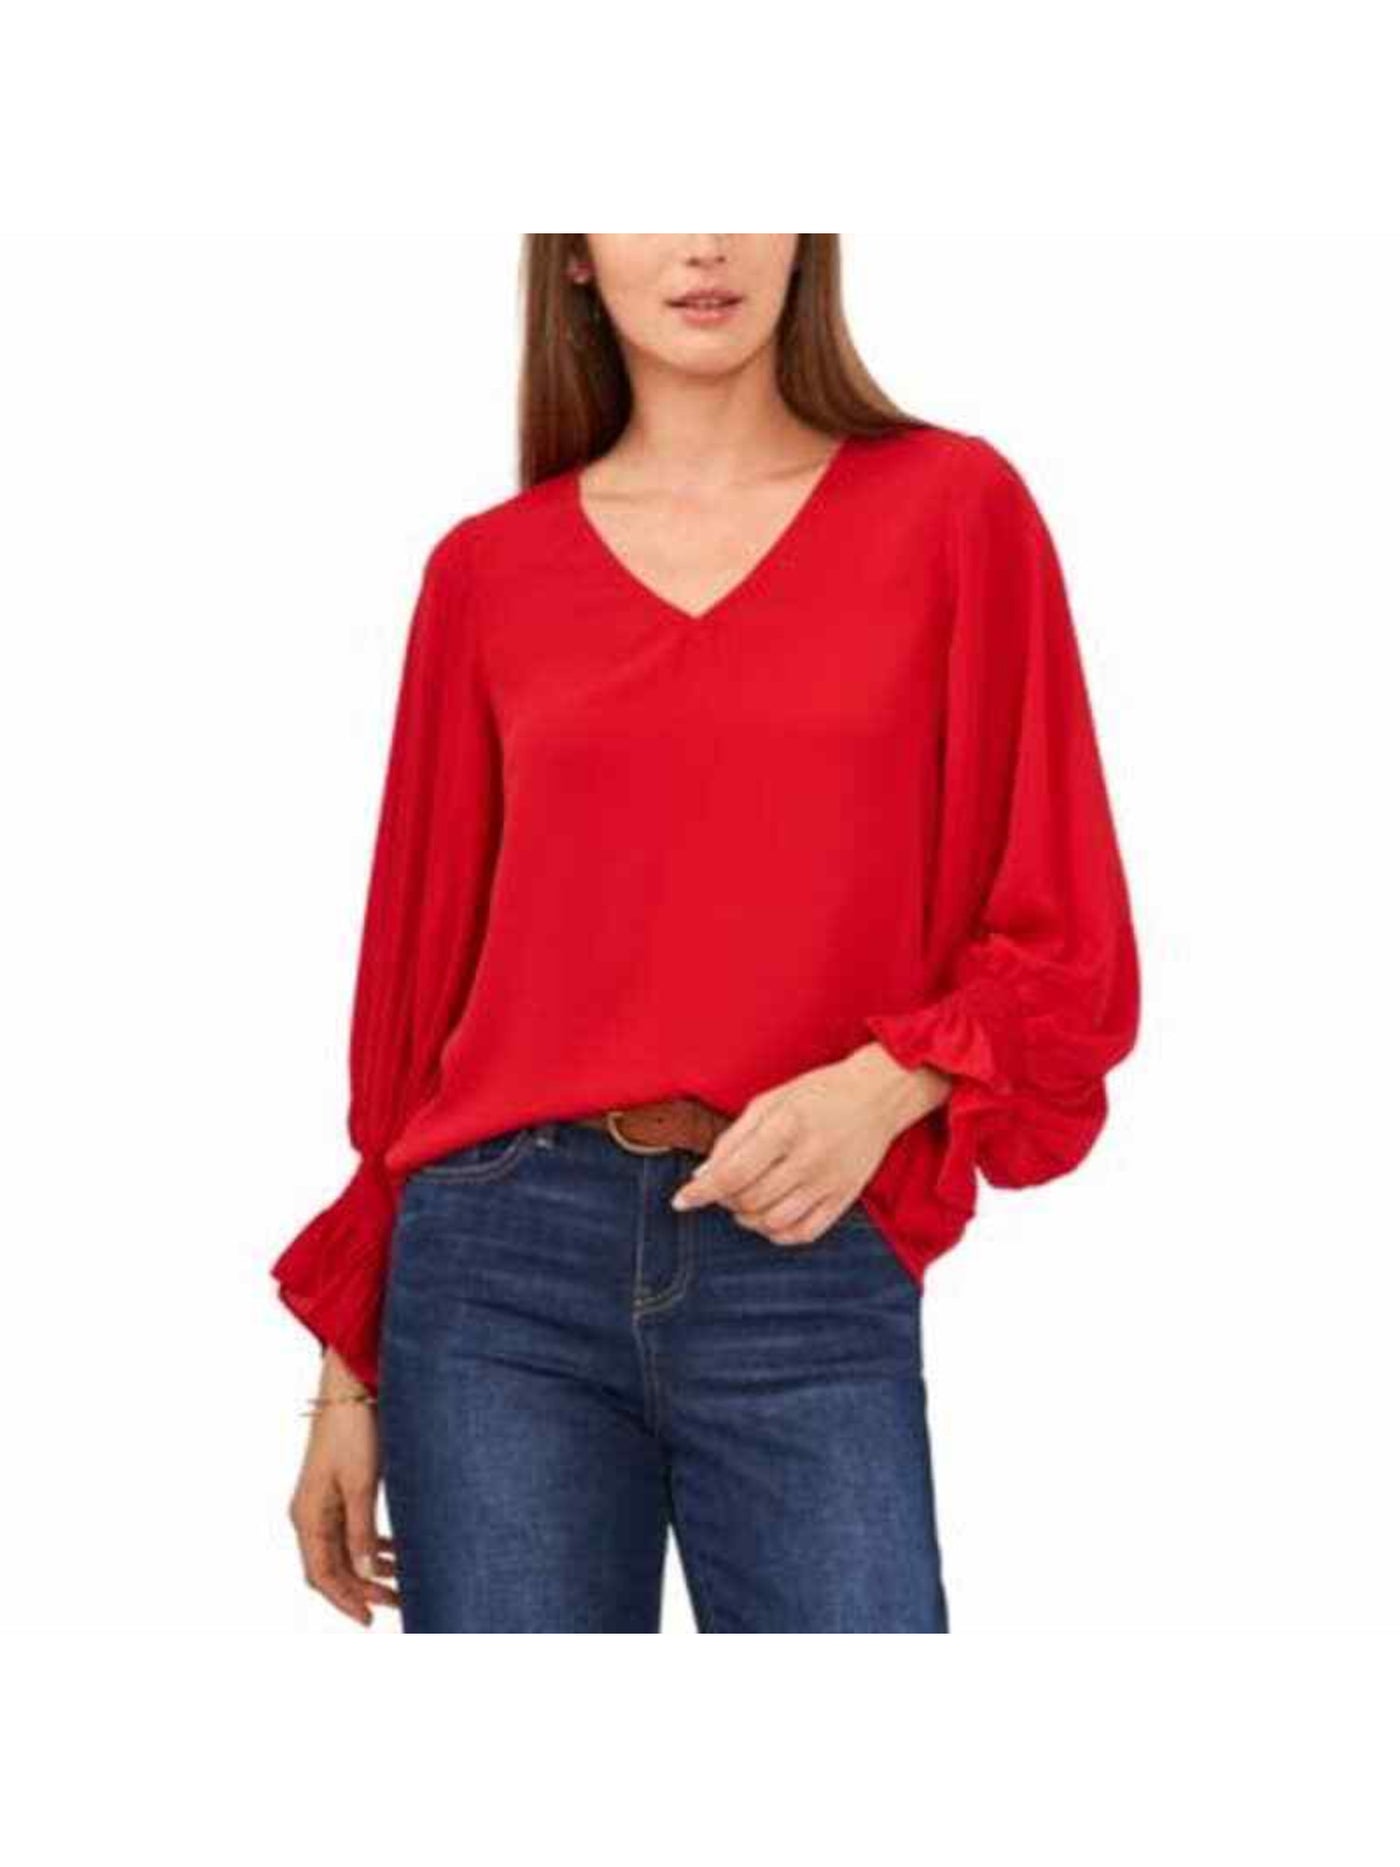 VINCE CAMUTO Womens Red Ruffled Smocked Cuffs Blouson Sleeve V Neck Blouse S